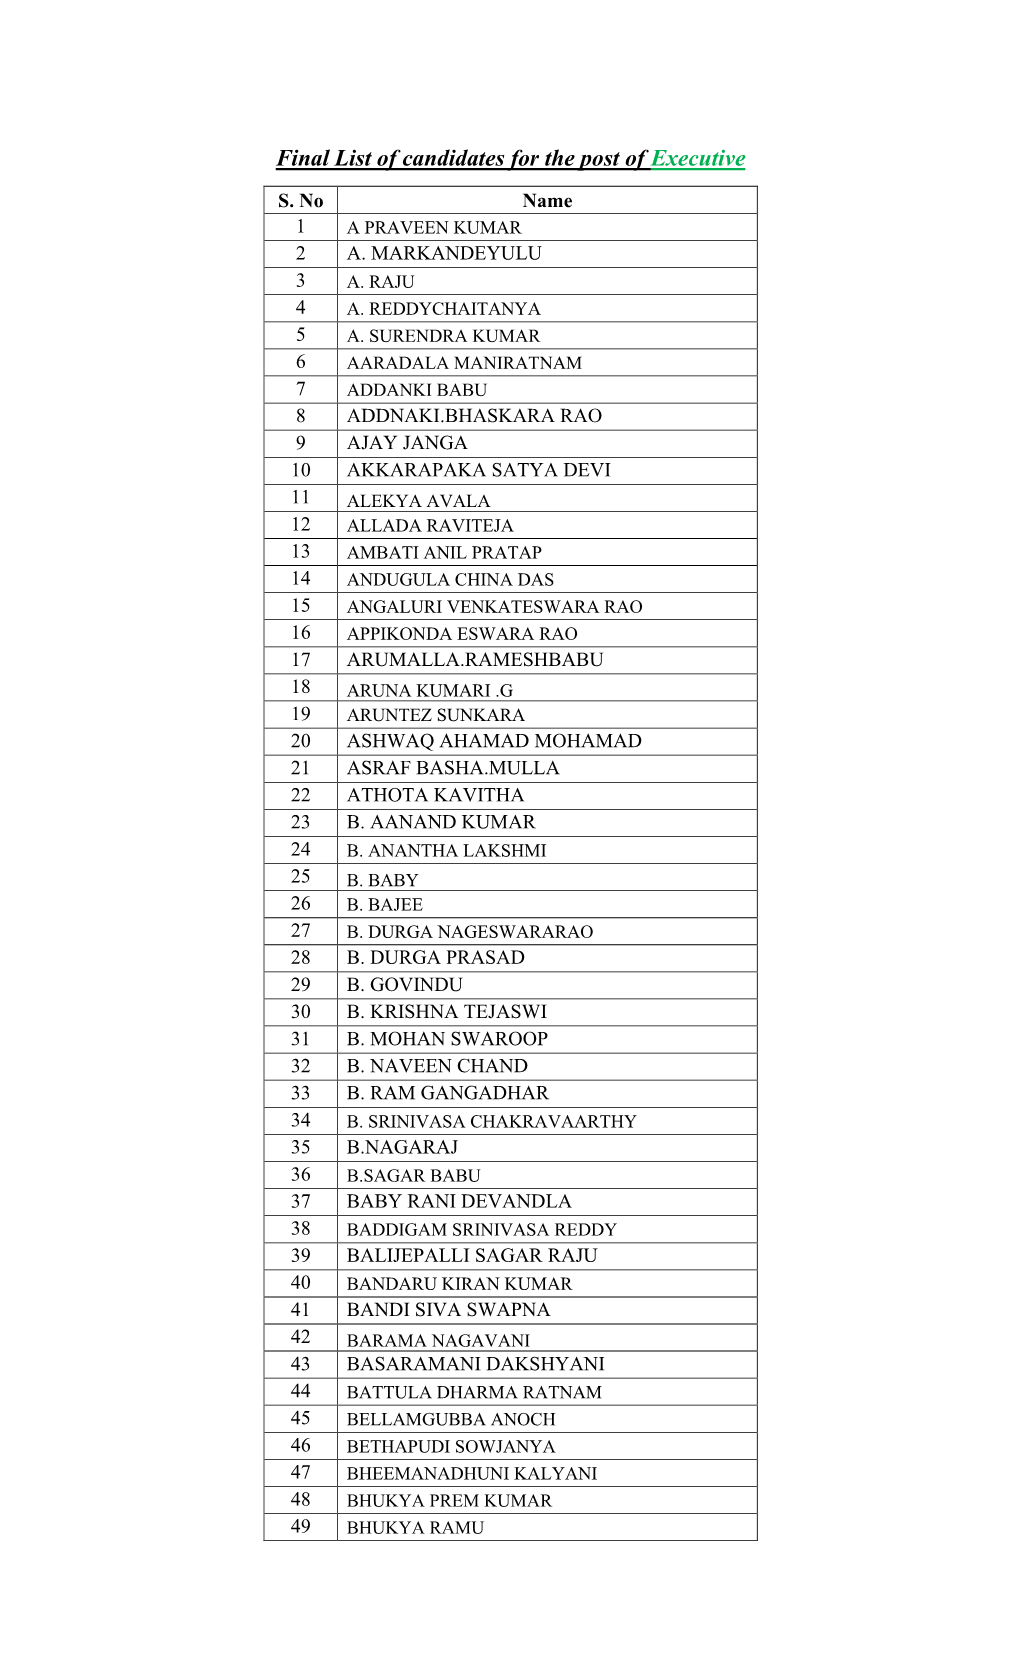 Final List of Candidates for the Post of Executive